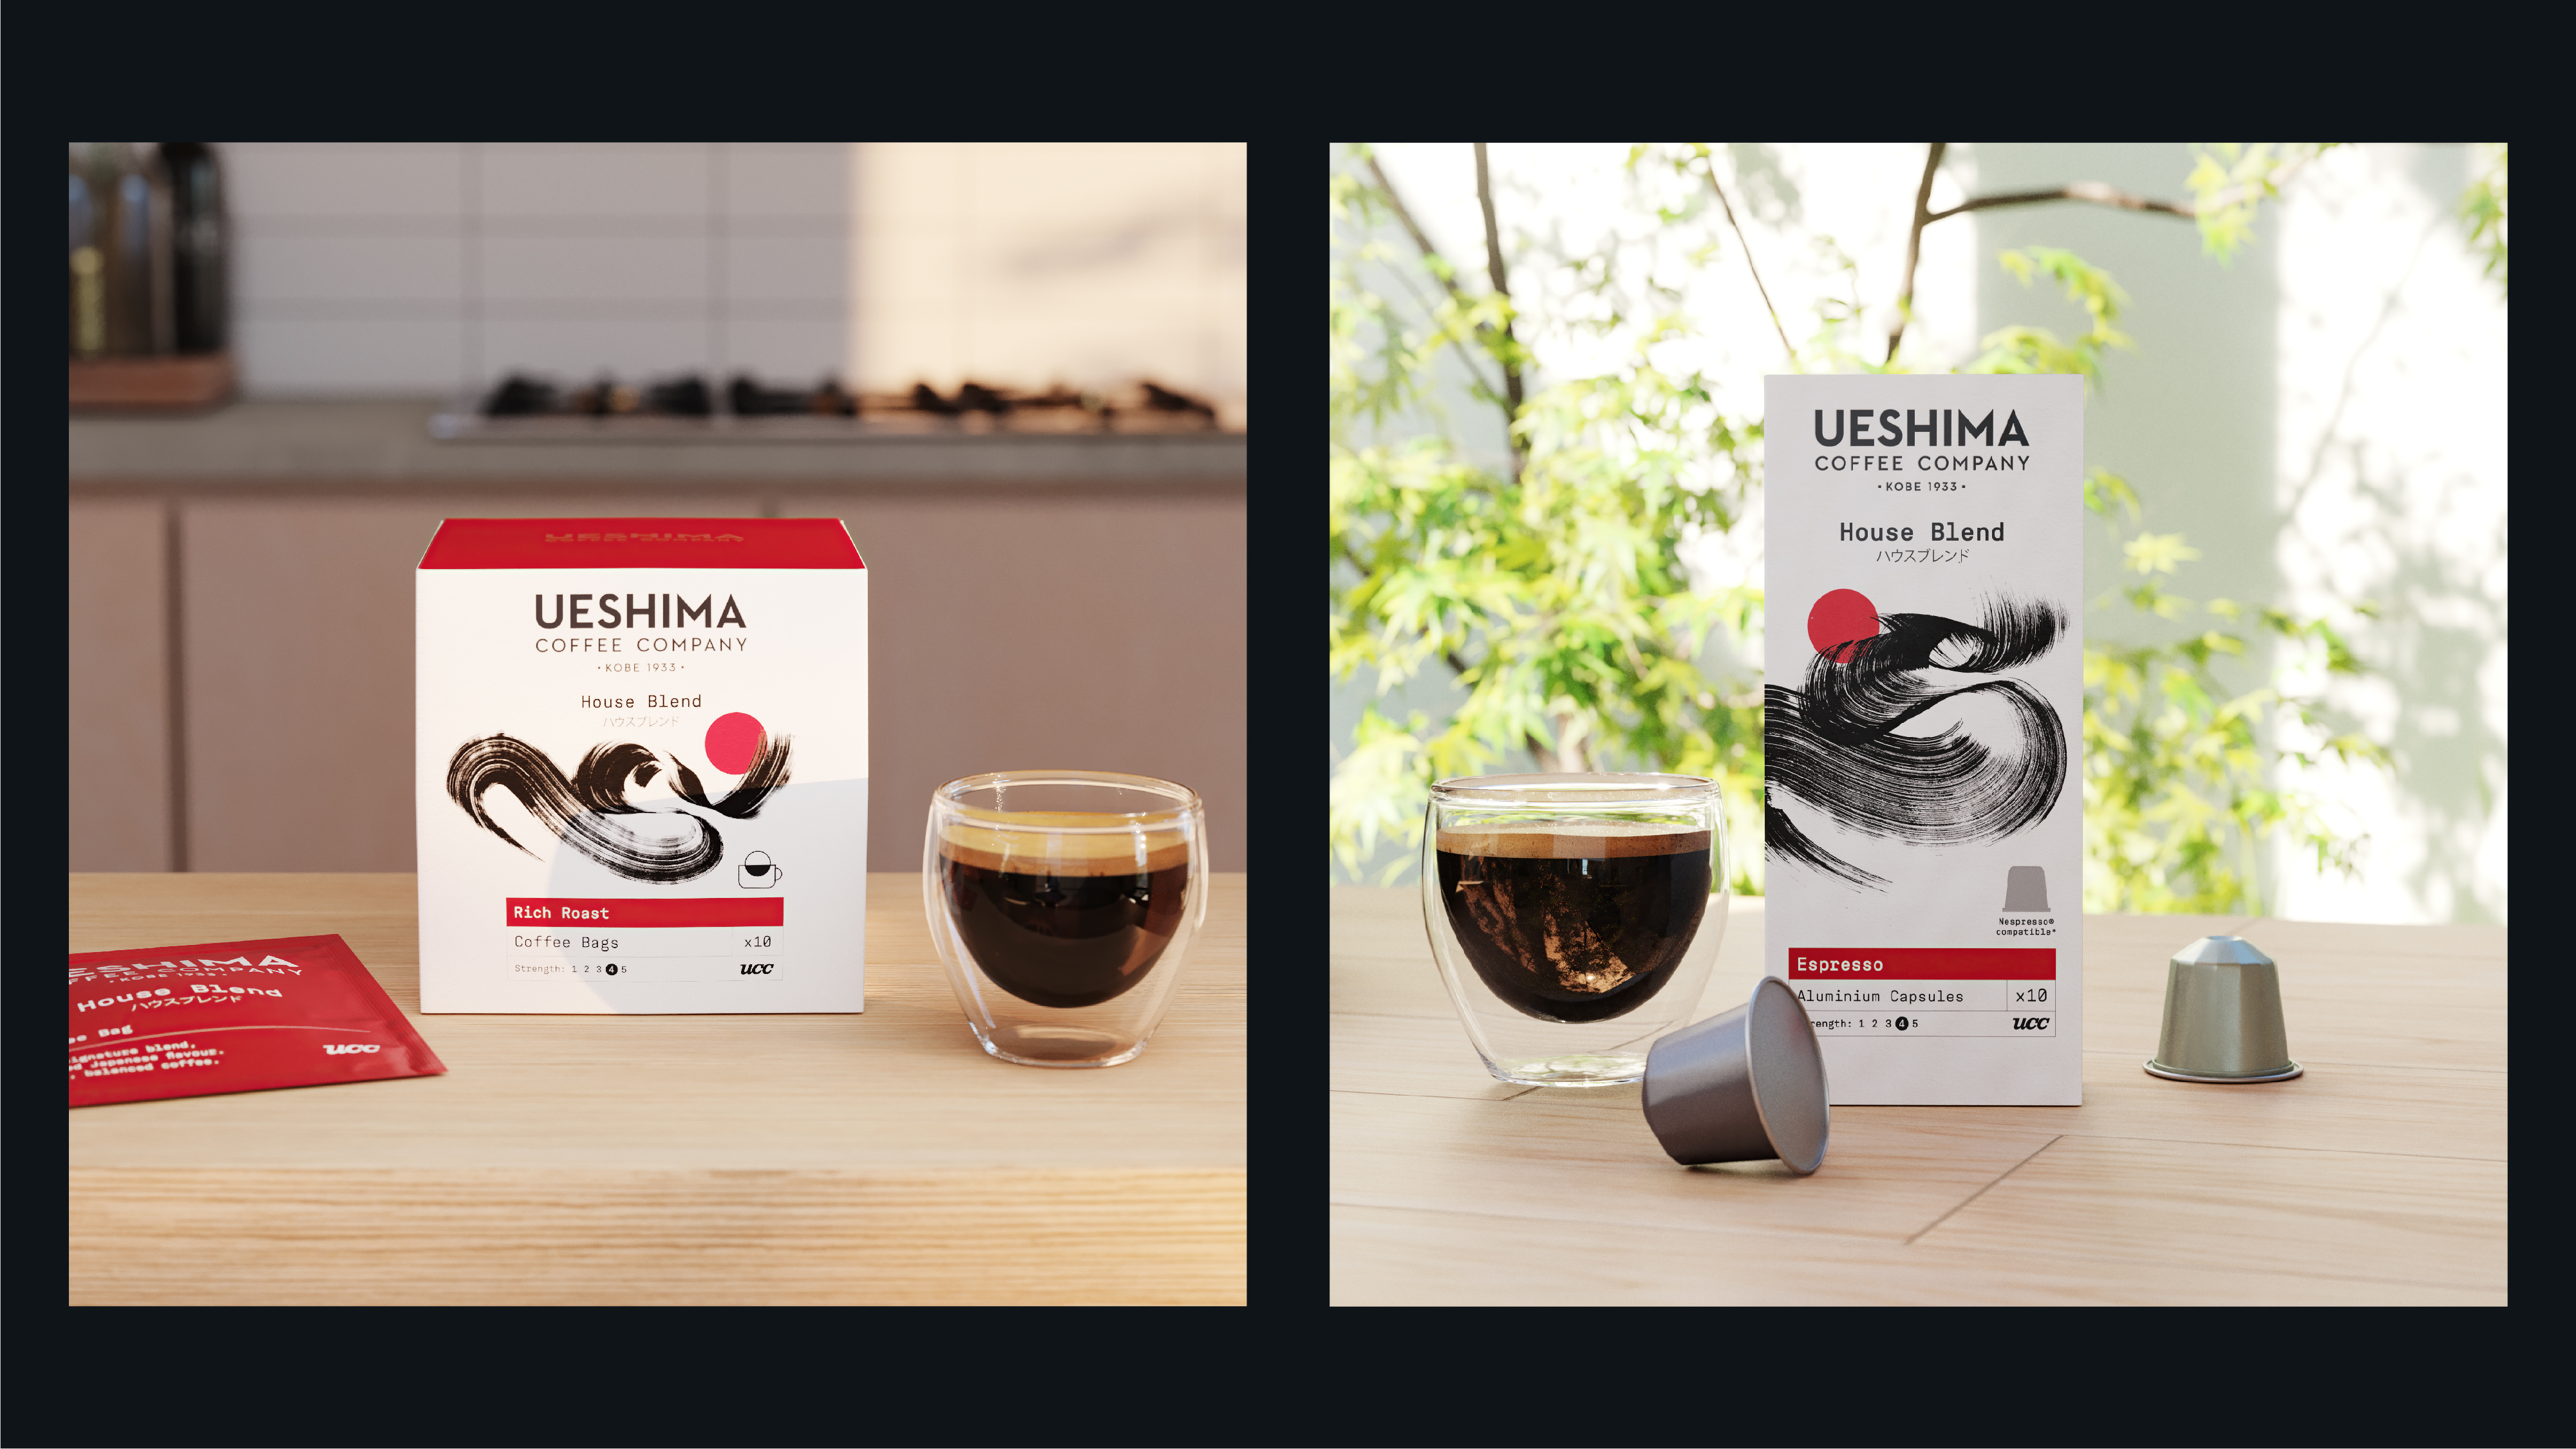 Japanese style coffee brewing at home – Ueshima Coffee Company